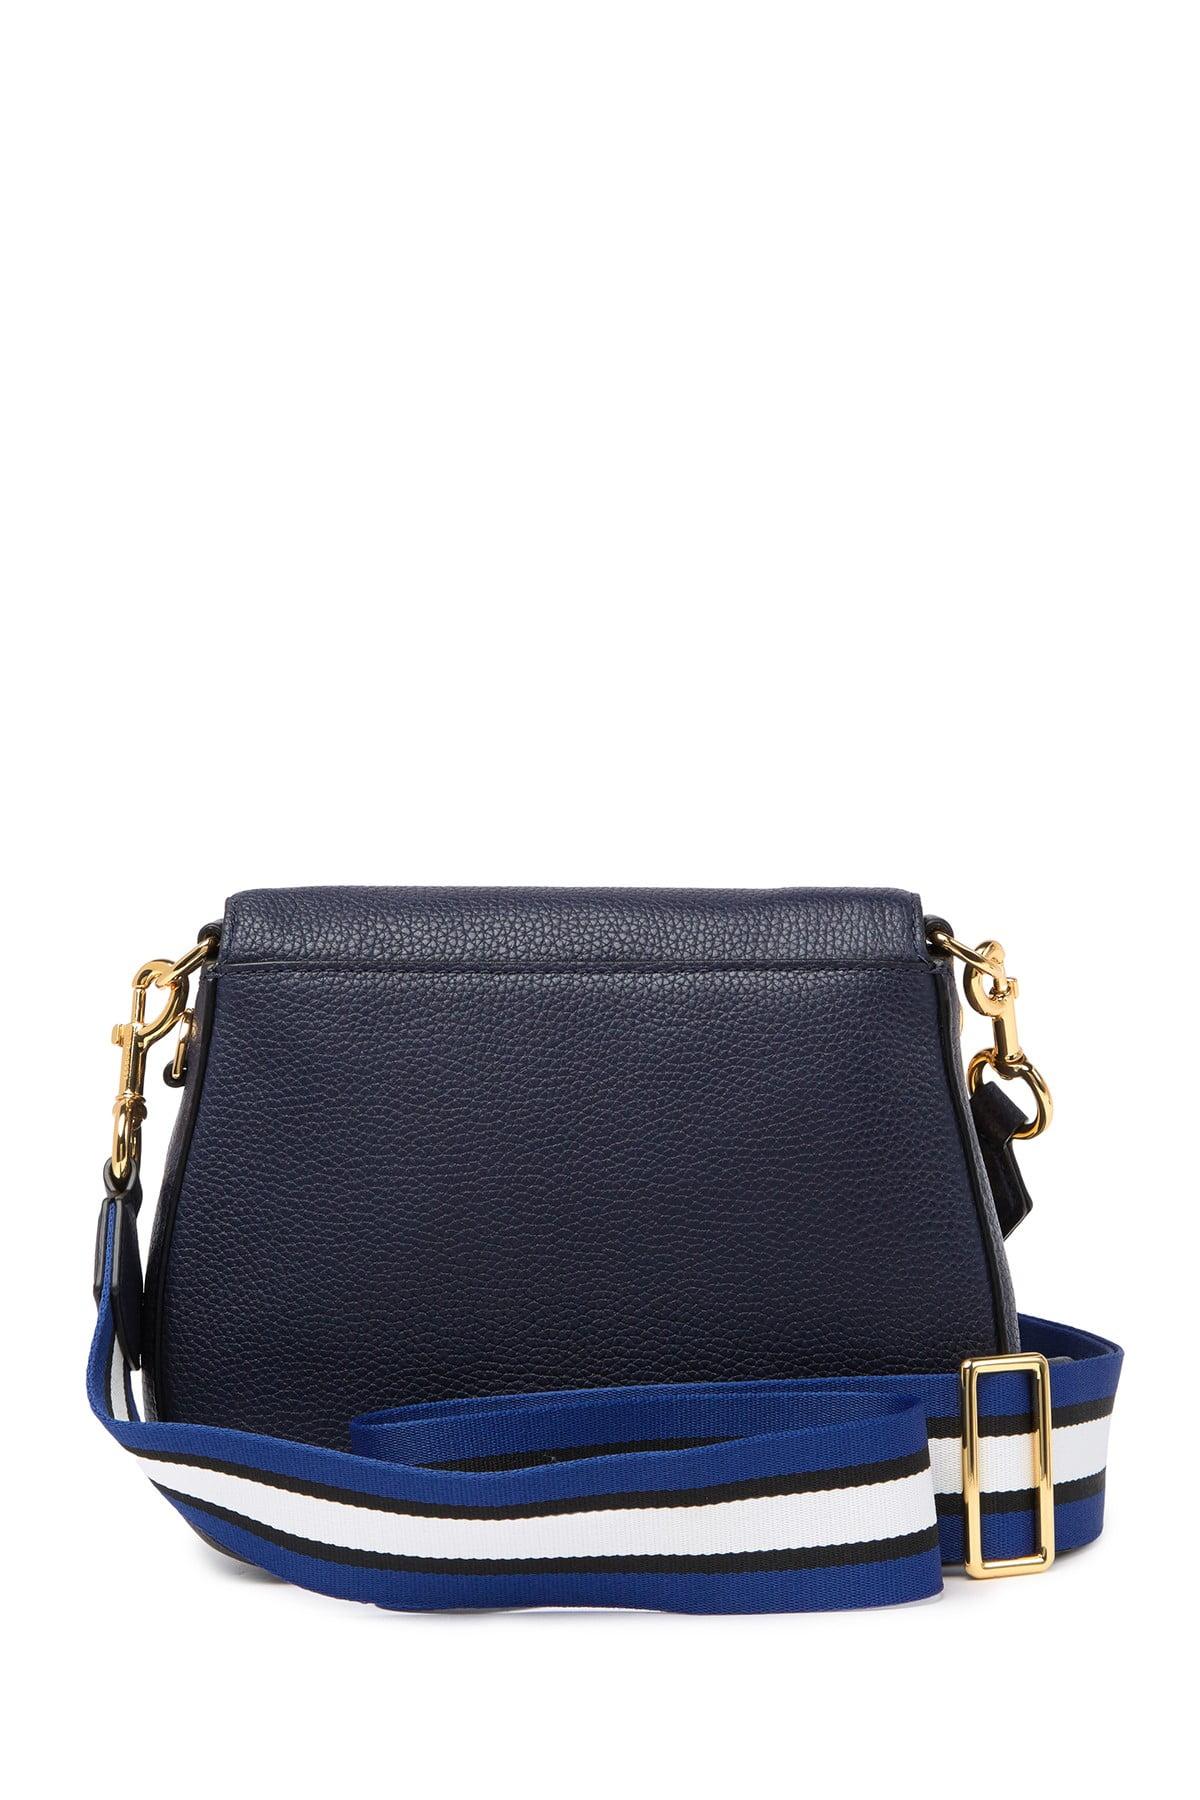 Marc Jacobs Gotham Small Nomad Crossbody Bag in Blue | Lyst